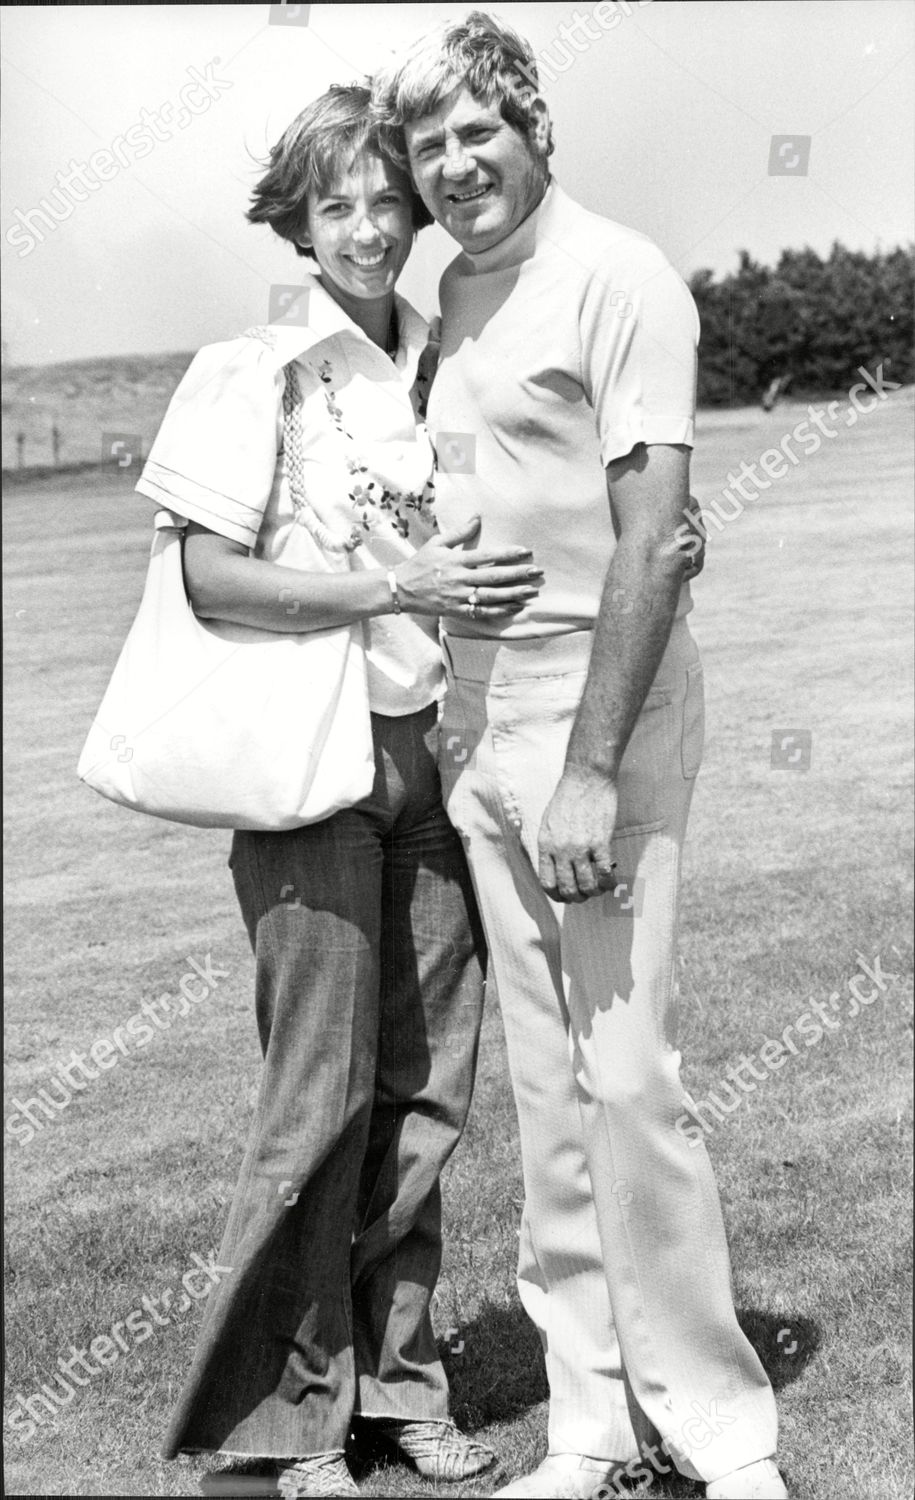 Stock photo of Golfer Doug Sanders With Wife Scottie Sanders George Douglas Sanders (born July 24 1933) Is A Former American Professional Golfer Who Won 20 Pga Tour Events During His Career.